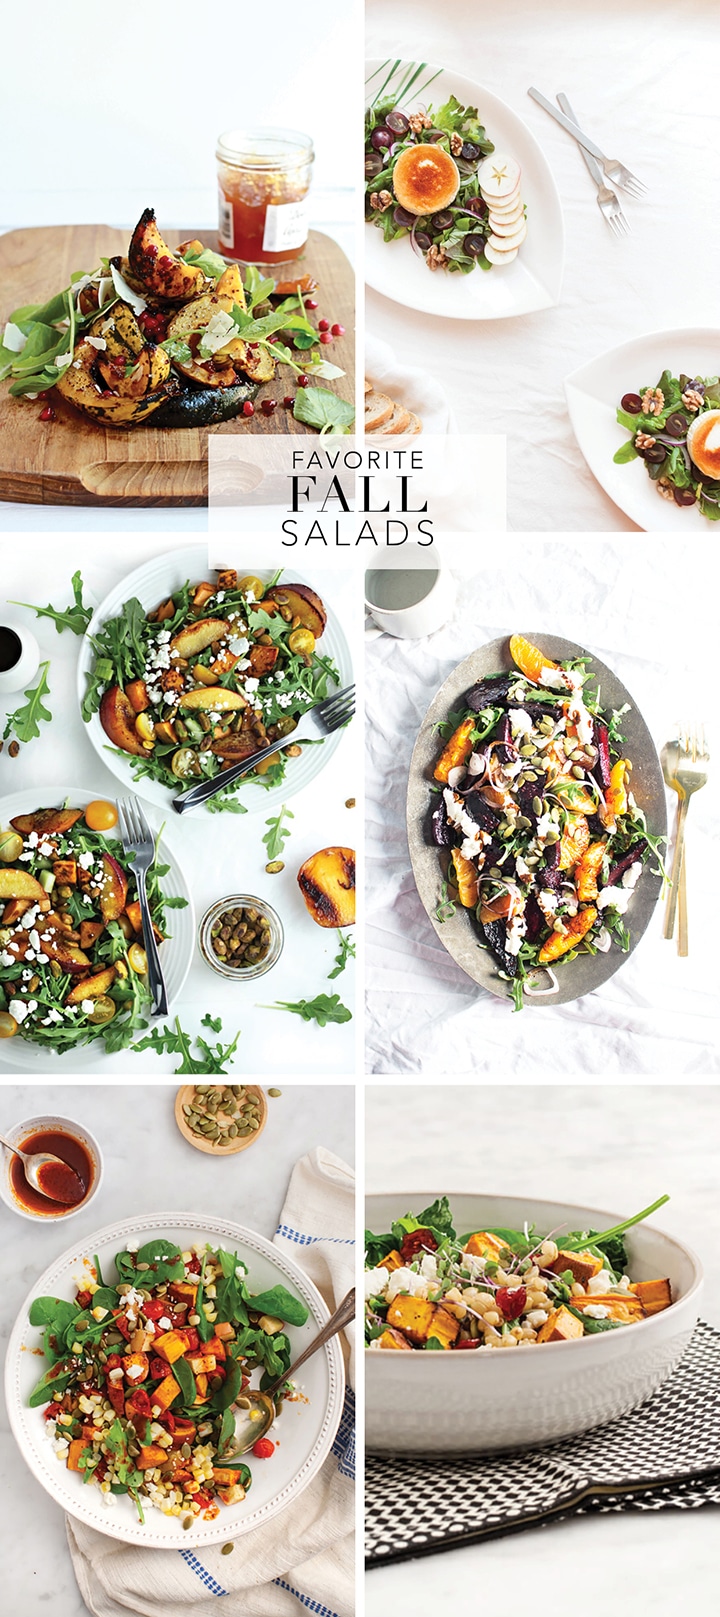 A roundup of ten amazing fall salad recipes to try...